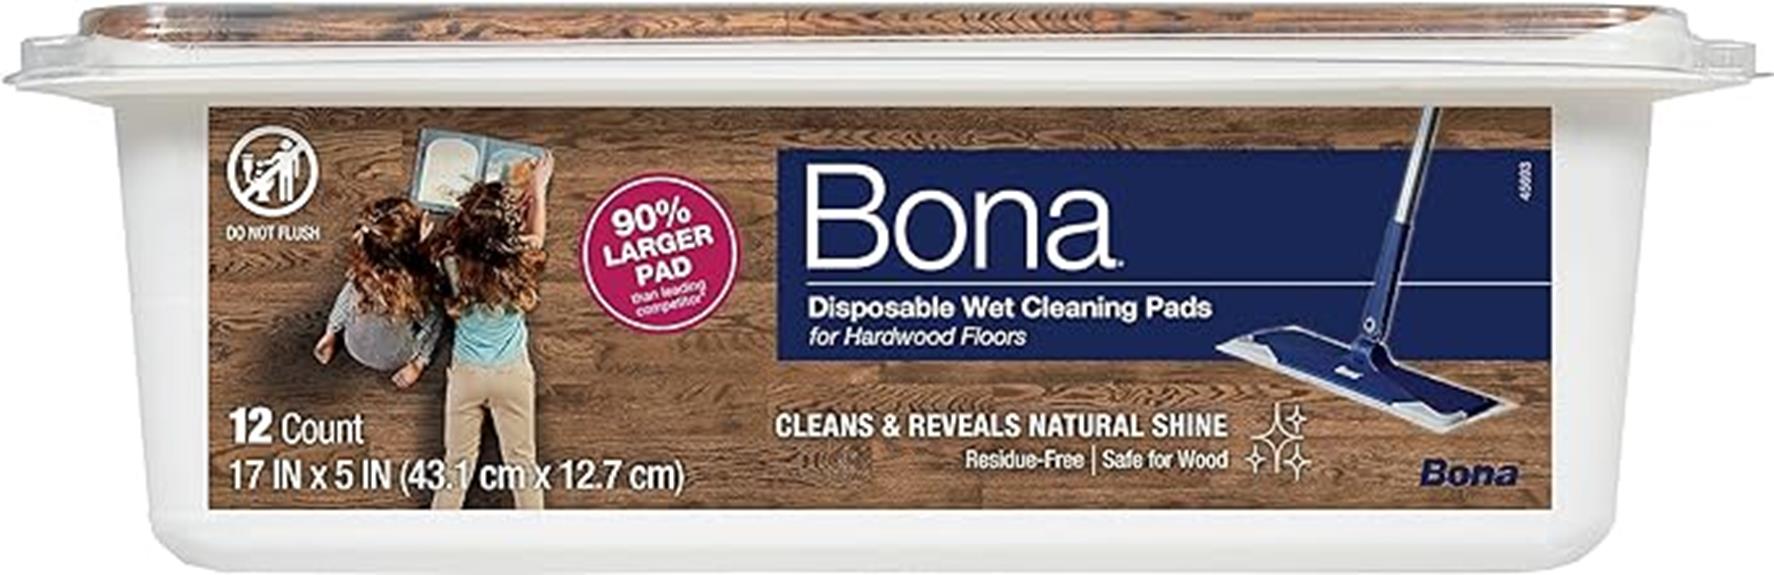 bona wet cleaning pads